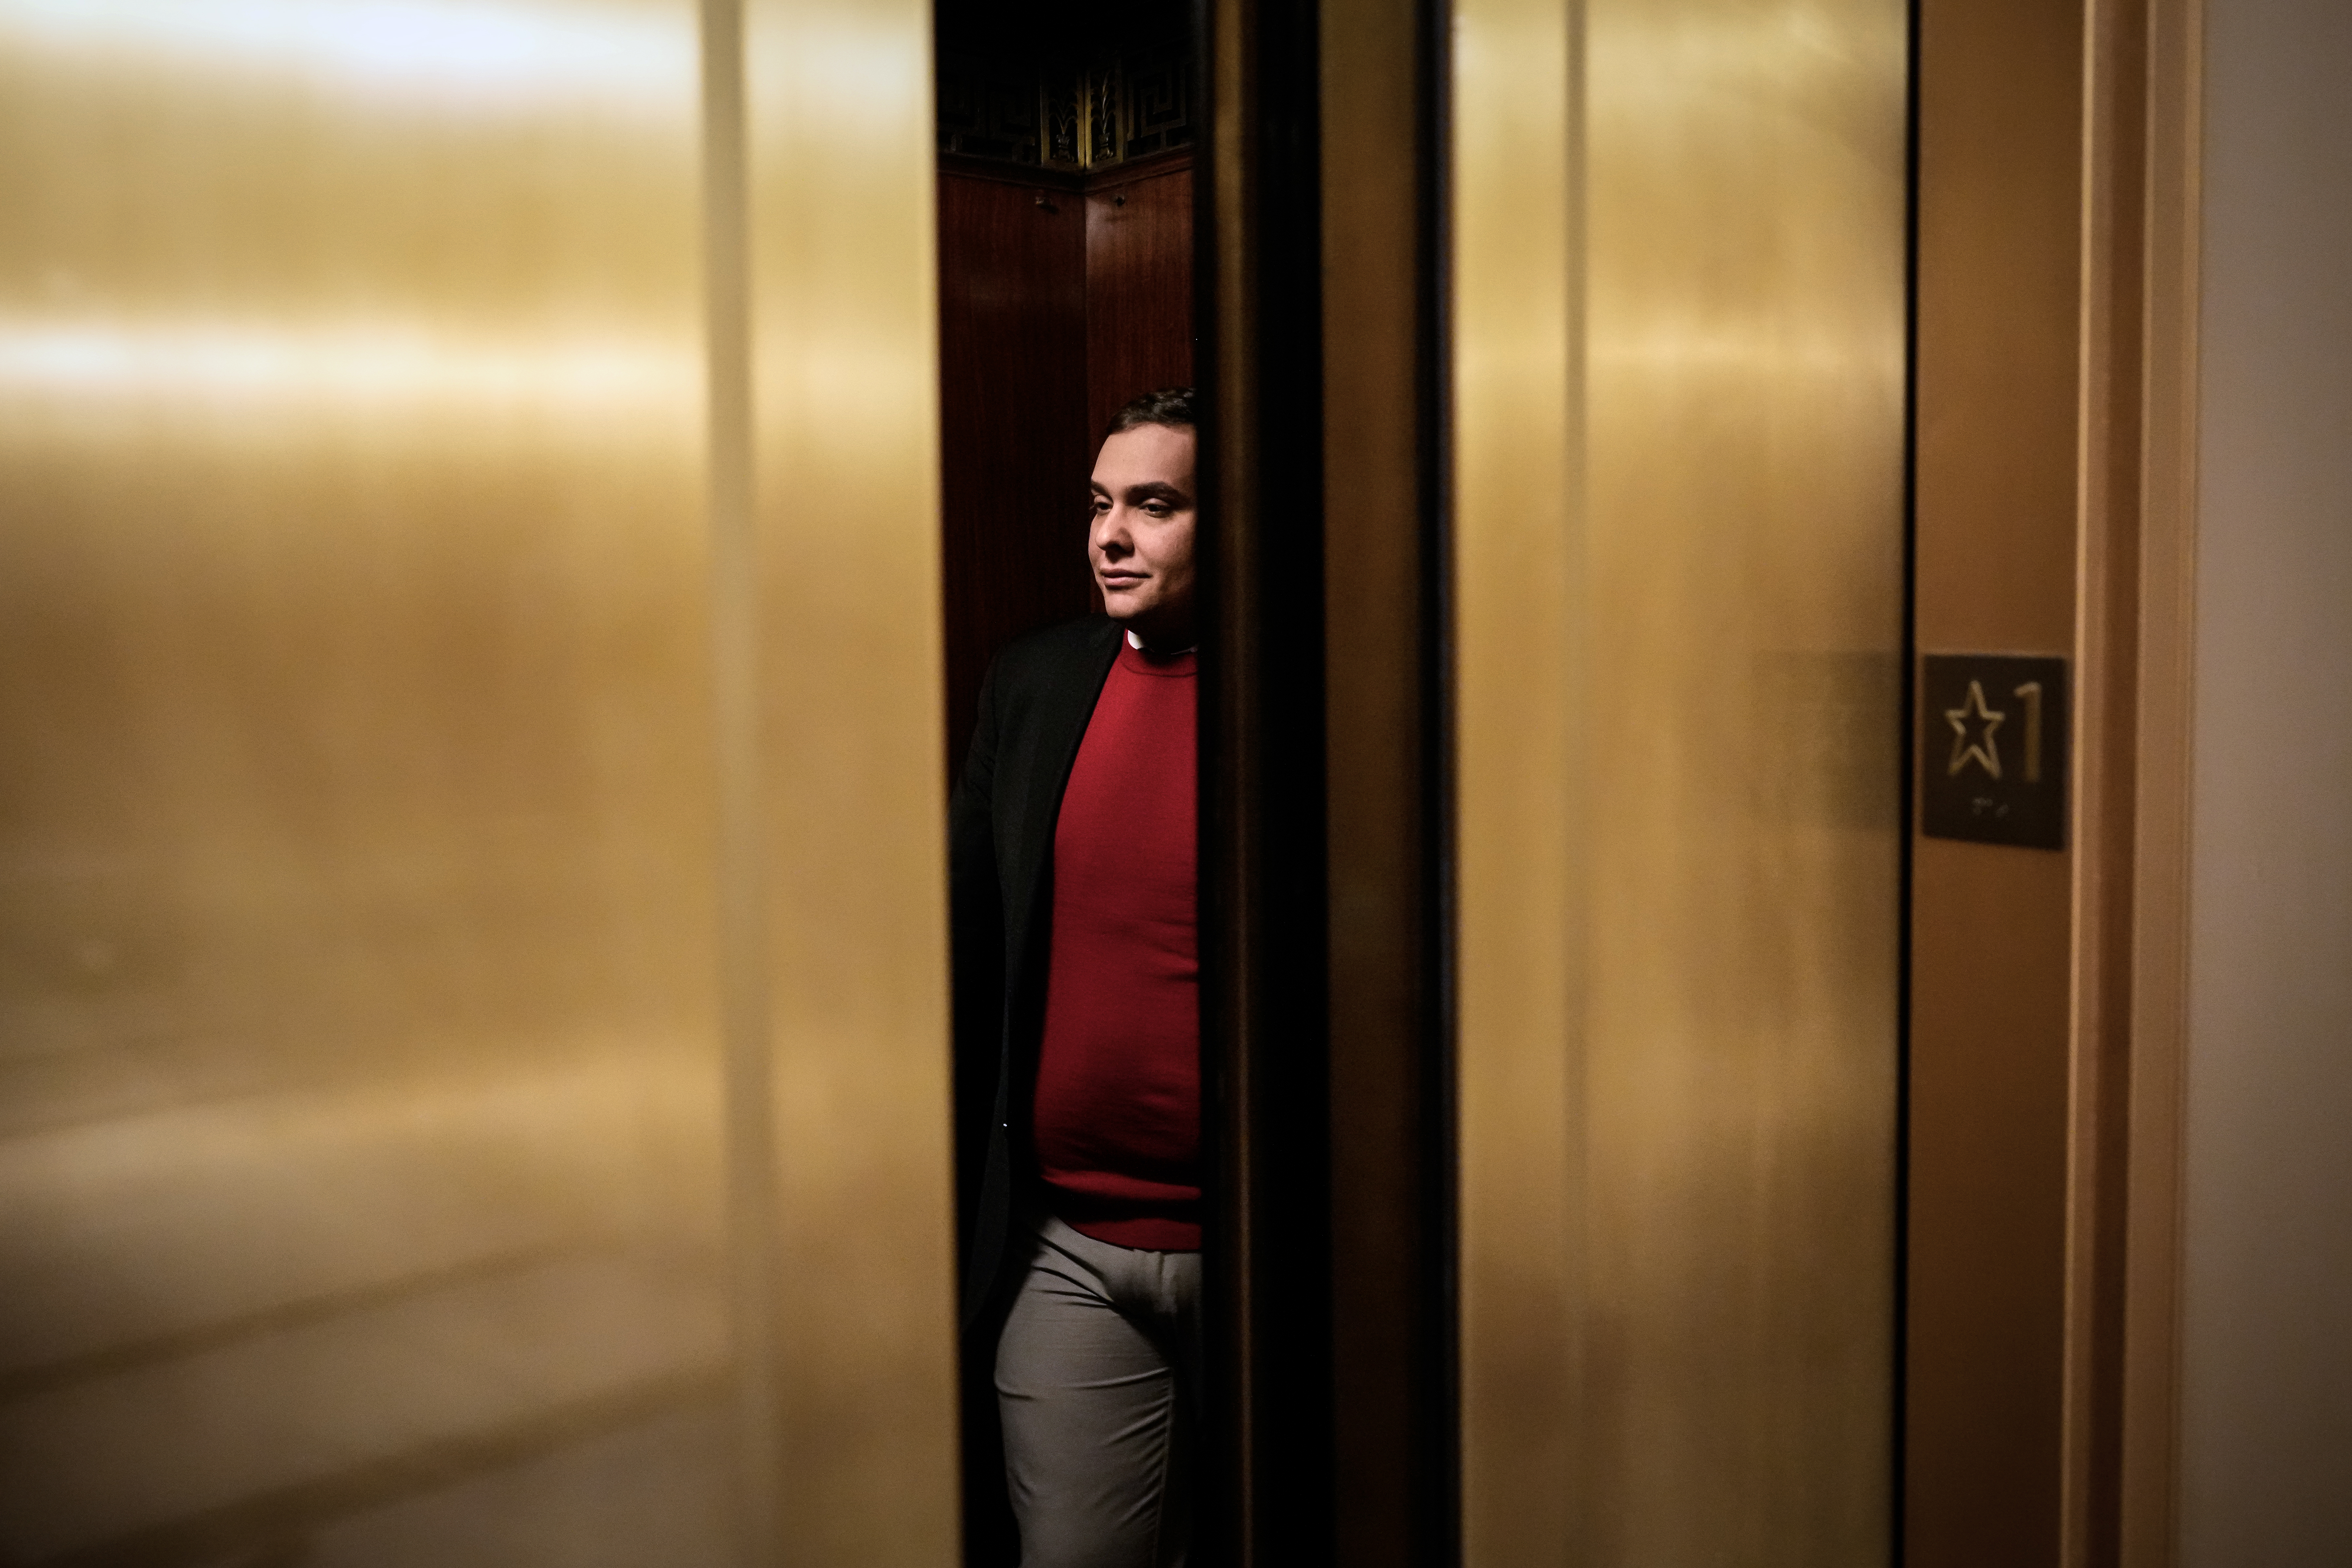 Rep. George Santos stands in an elevator as the doors frame his silhouette.